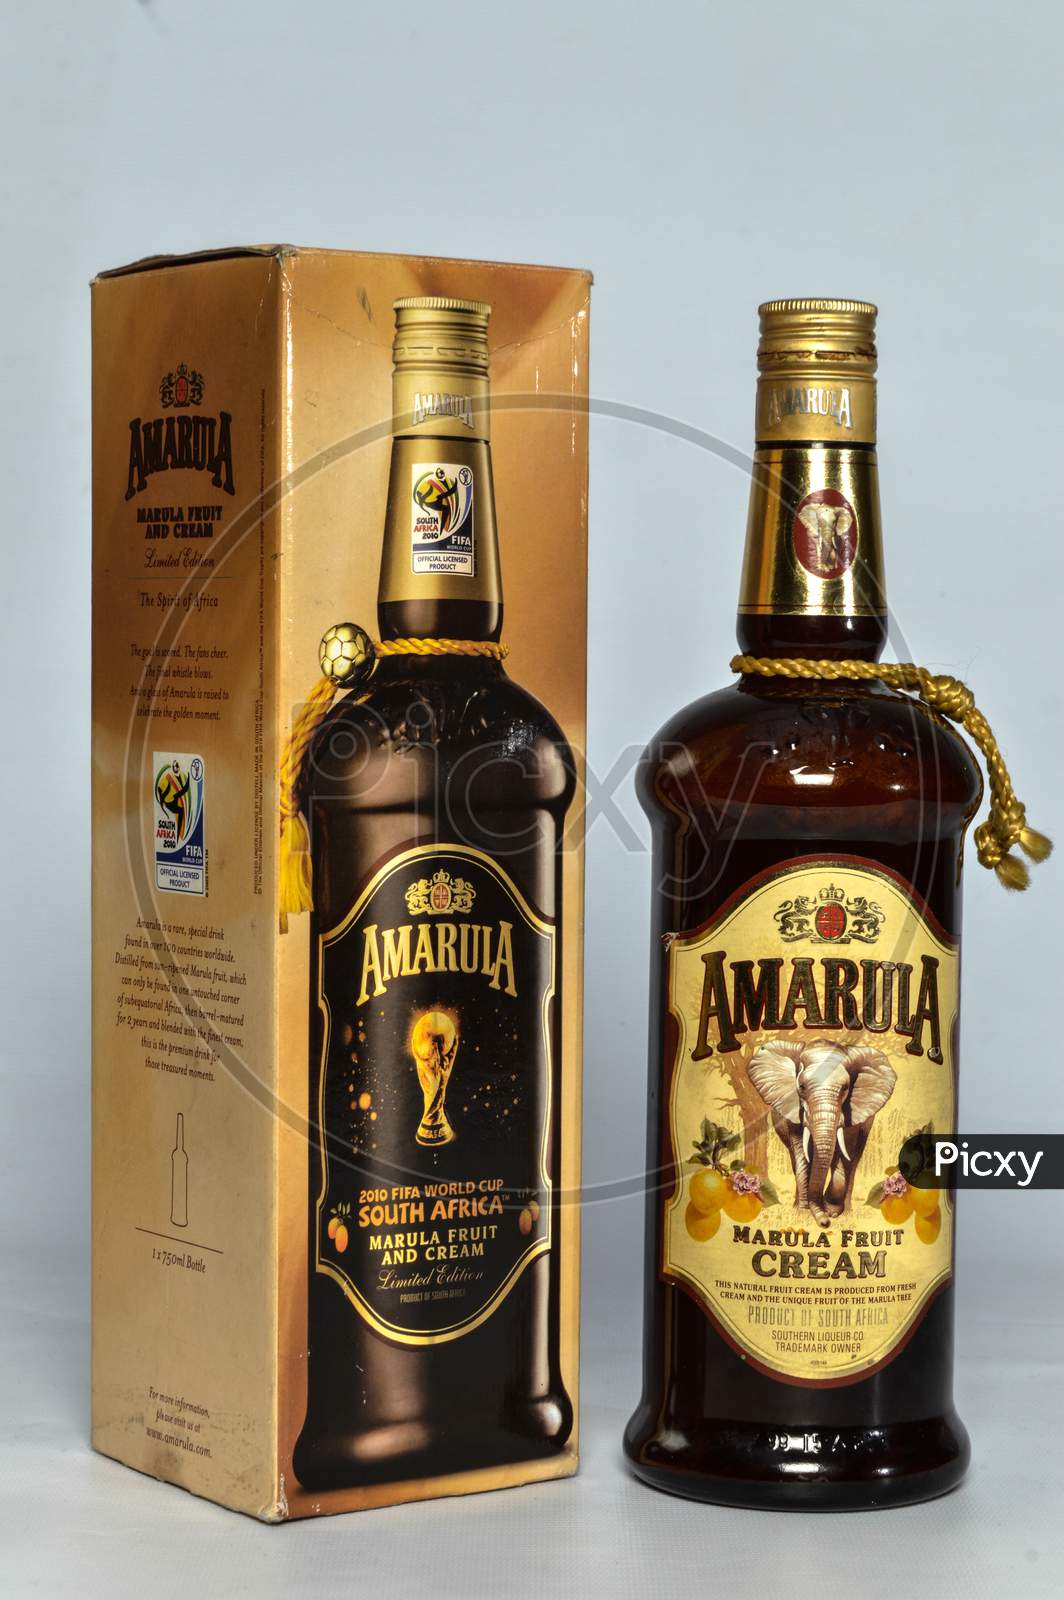 Amarula 2010 Fifa World Cup South Africa Marula Fruit And Cream Limited Edition Isolated On White Background 750 M.L.